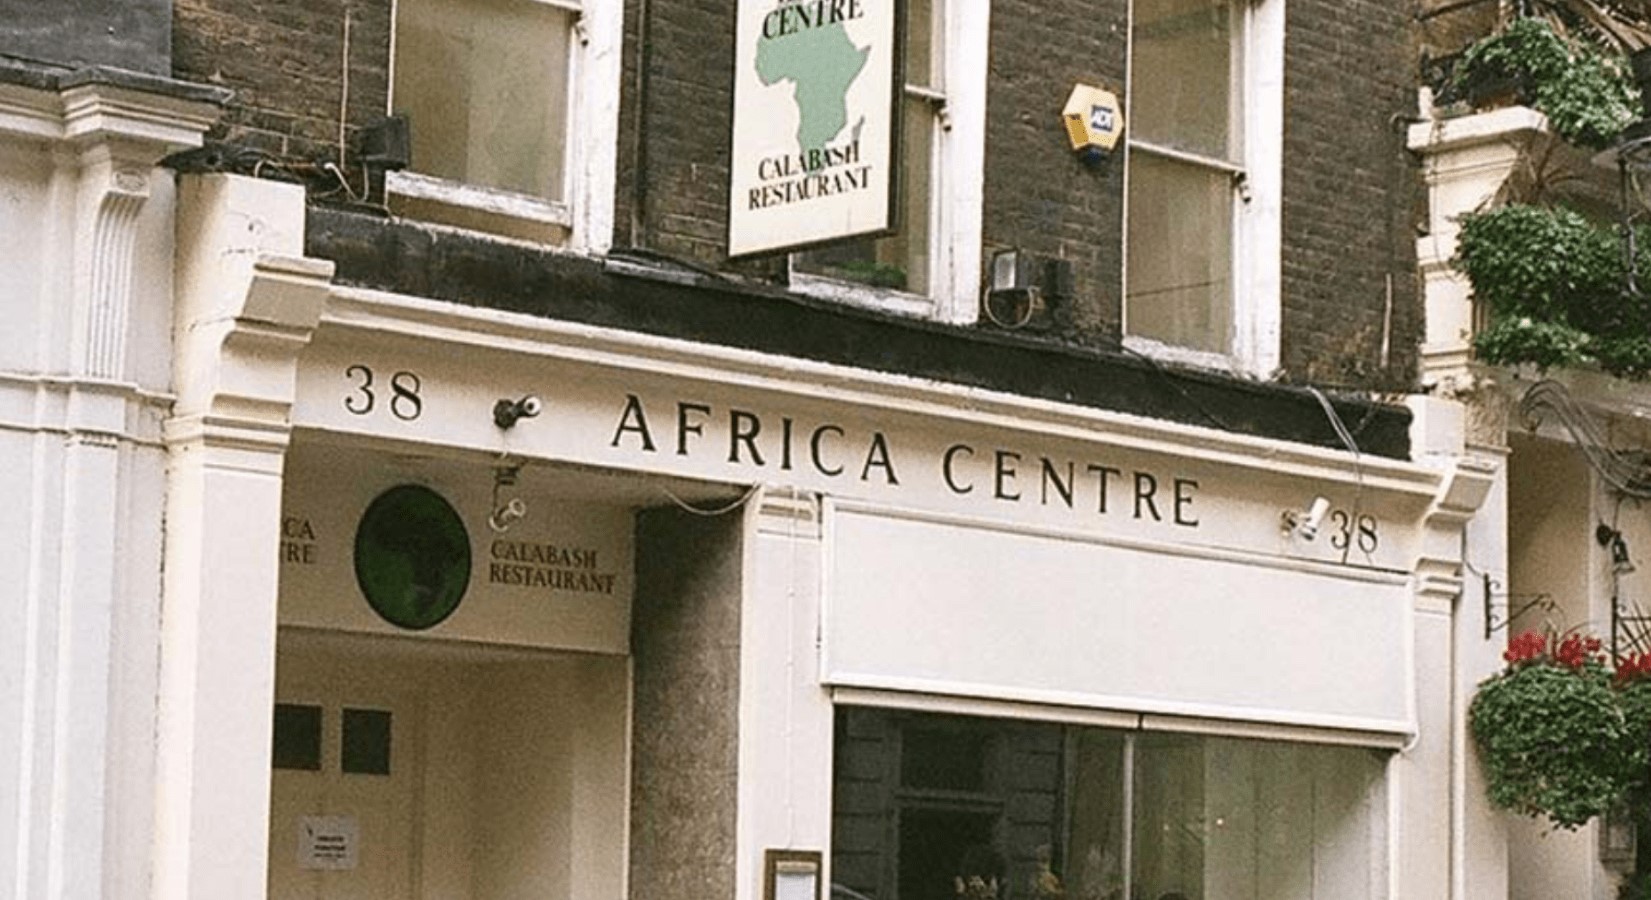 The Africa Centre,